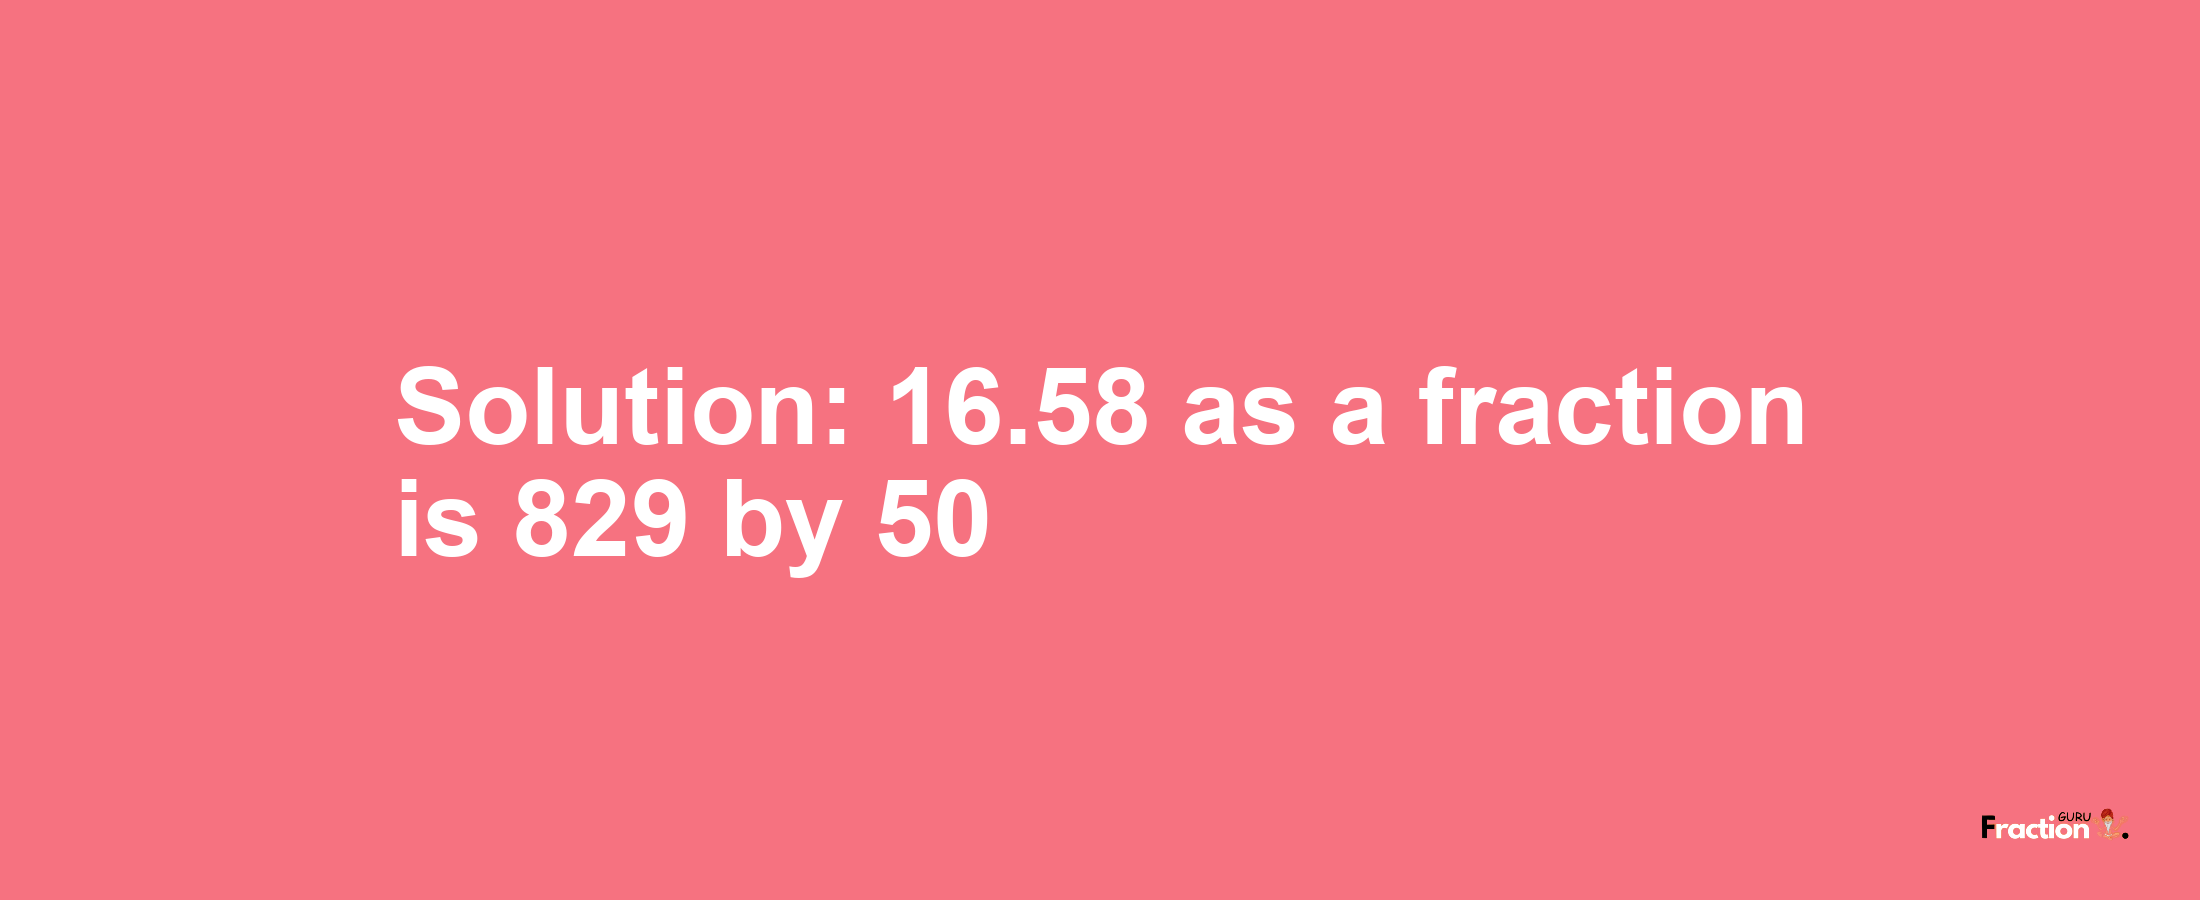 Solution:16.58 as a fraction is 829/50